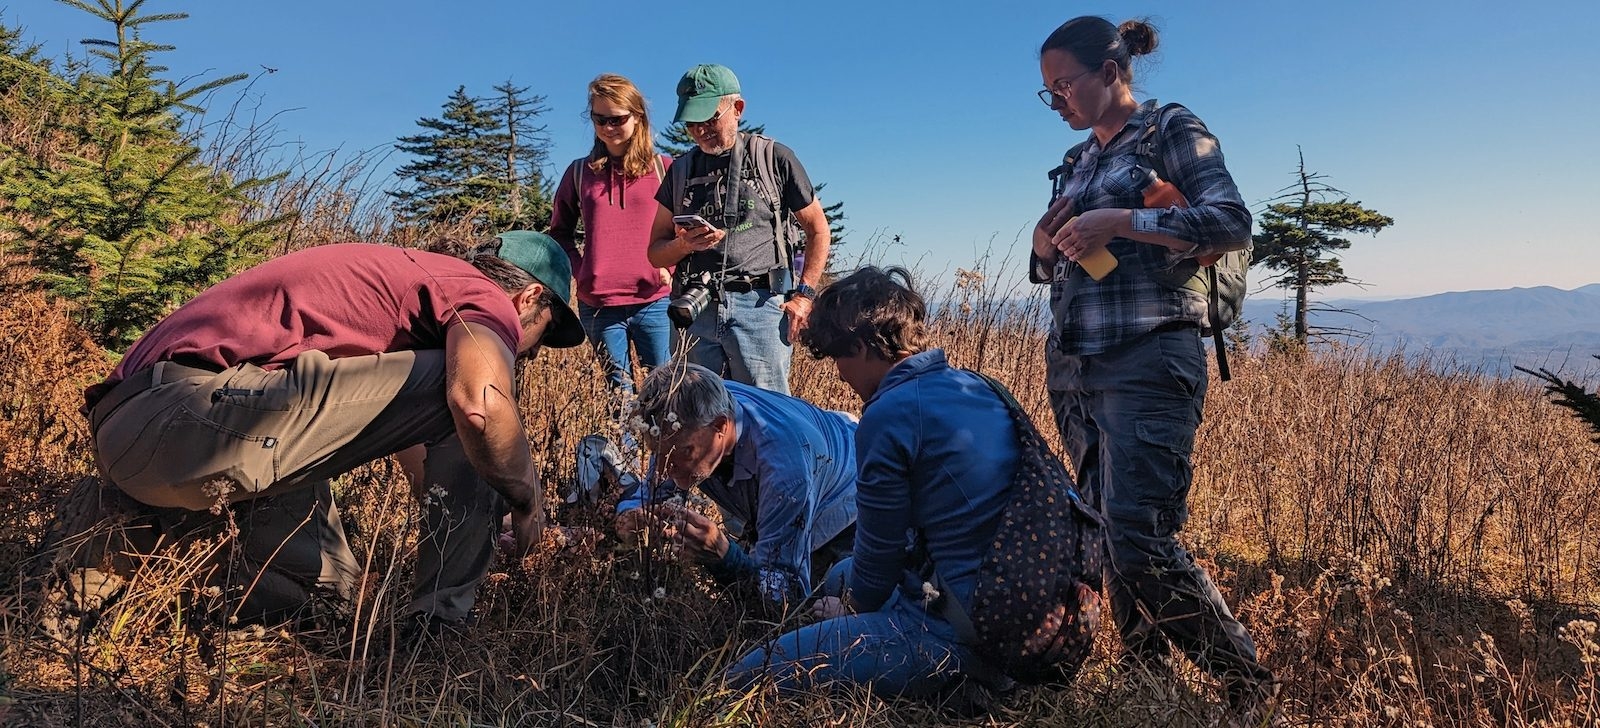 Students and faculty engage in transdisciplinary research and graduate training in environmental restoration at Virginia Tech